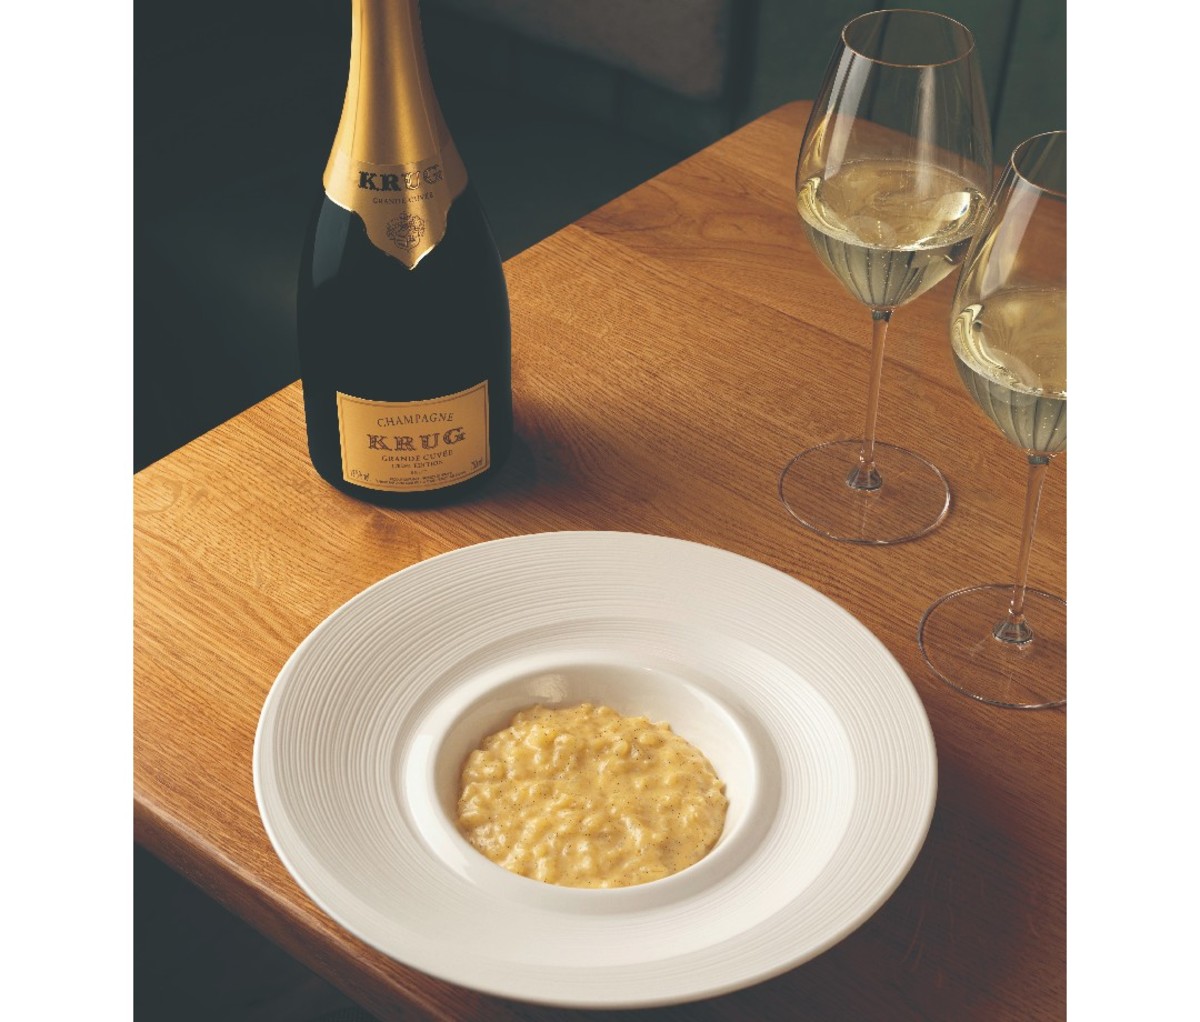 Bottle of Champagne and two filled glasses on a table beside a bowl of rice pudding.